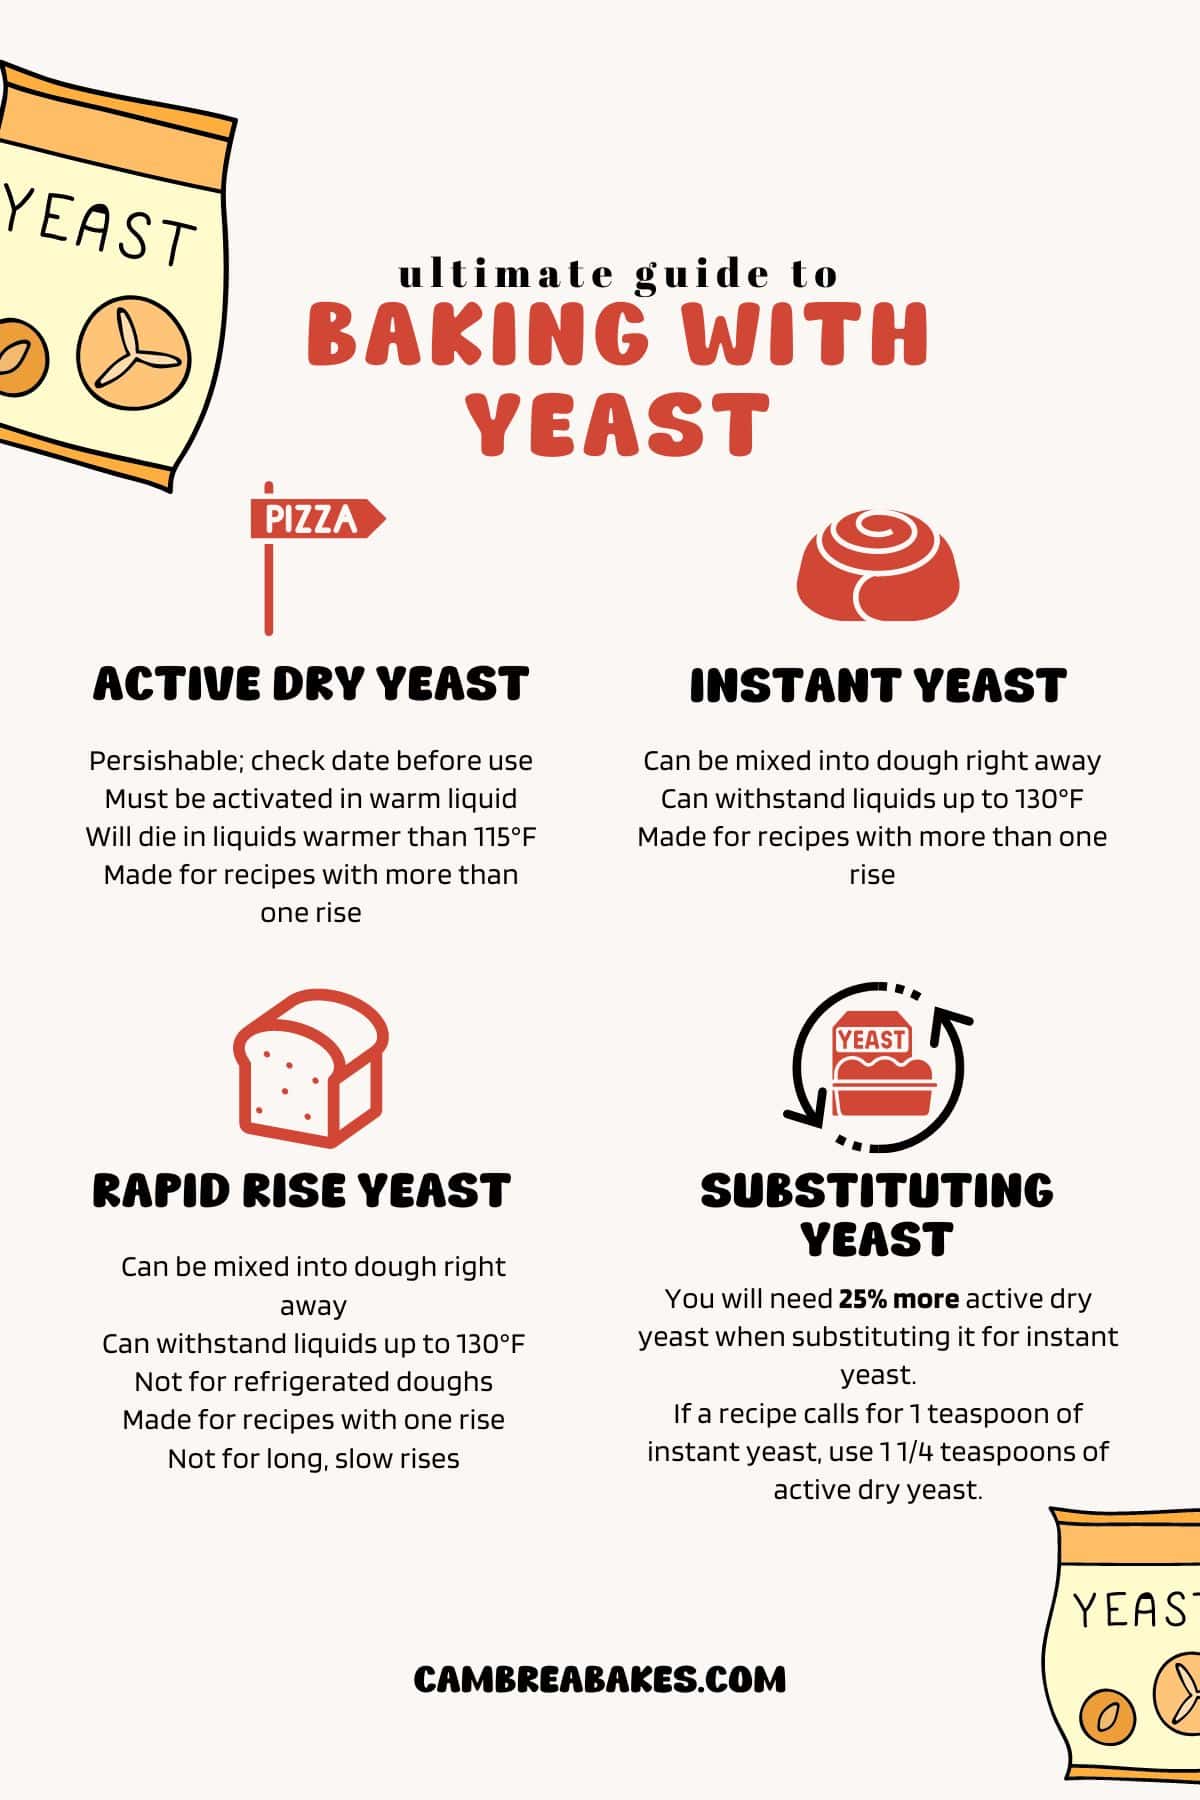 A pdf guide to baking with yeast with text and photos.